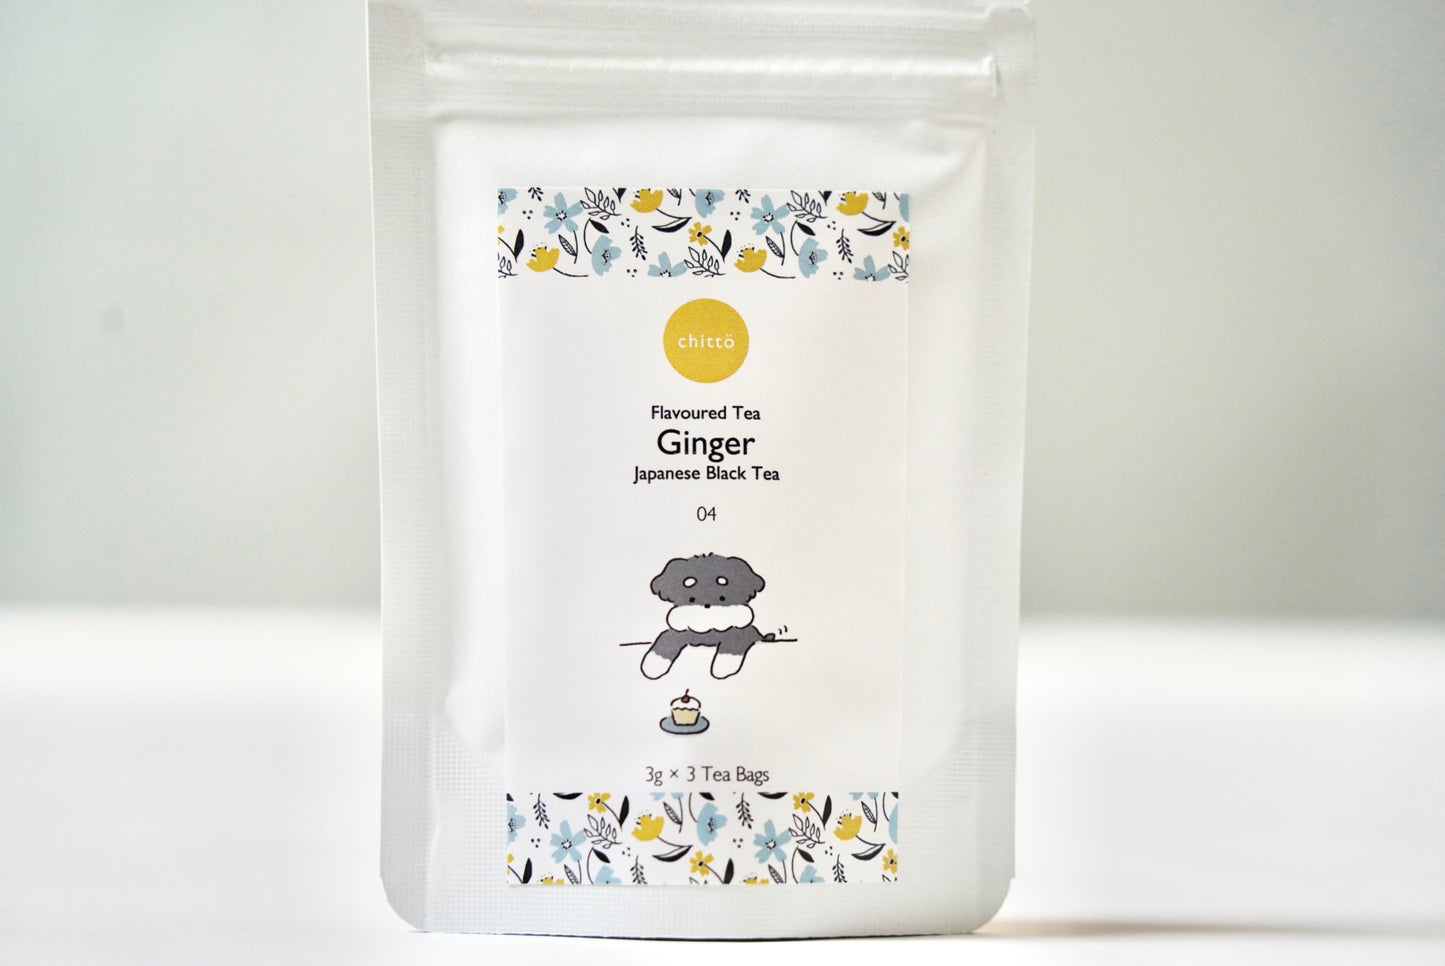 04 GINGER [Japanese Black Tea Flavored Tea Ginger] with Dogs. Series (Schnauzer)